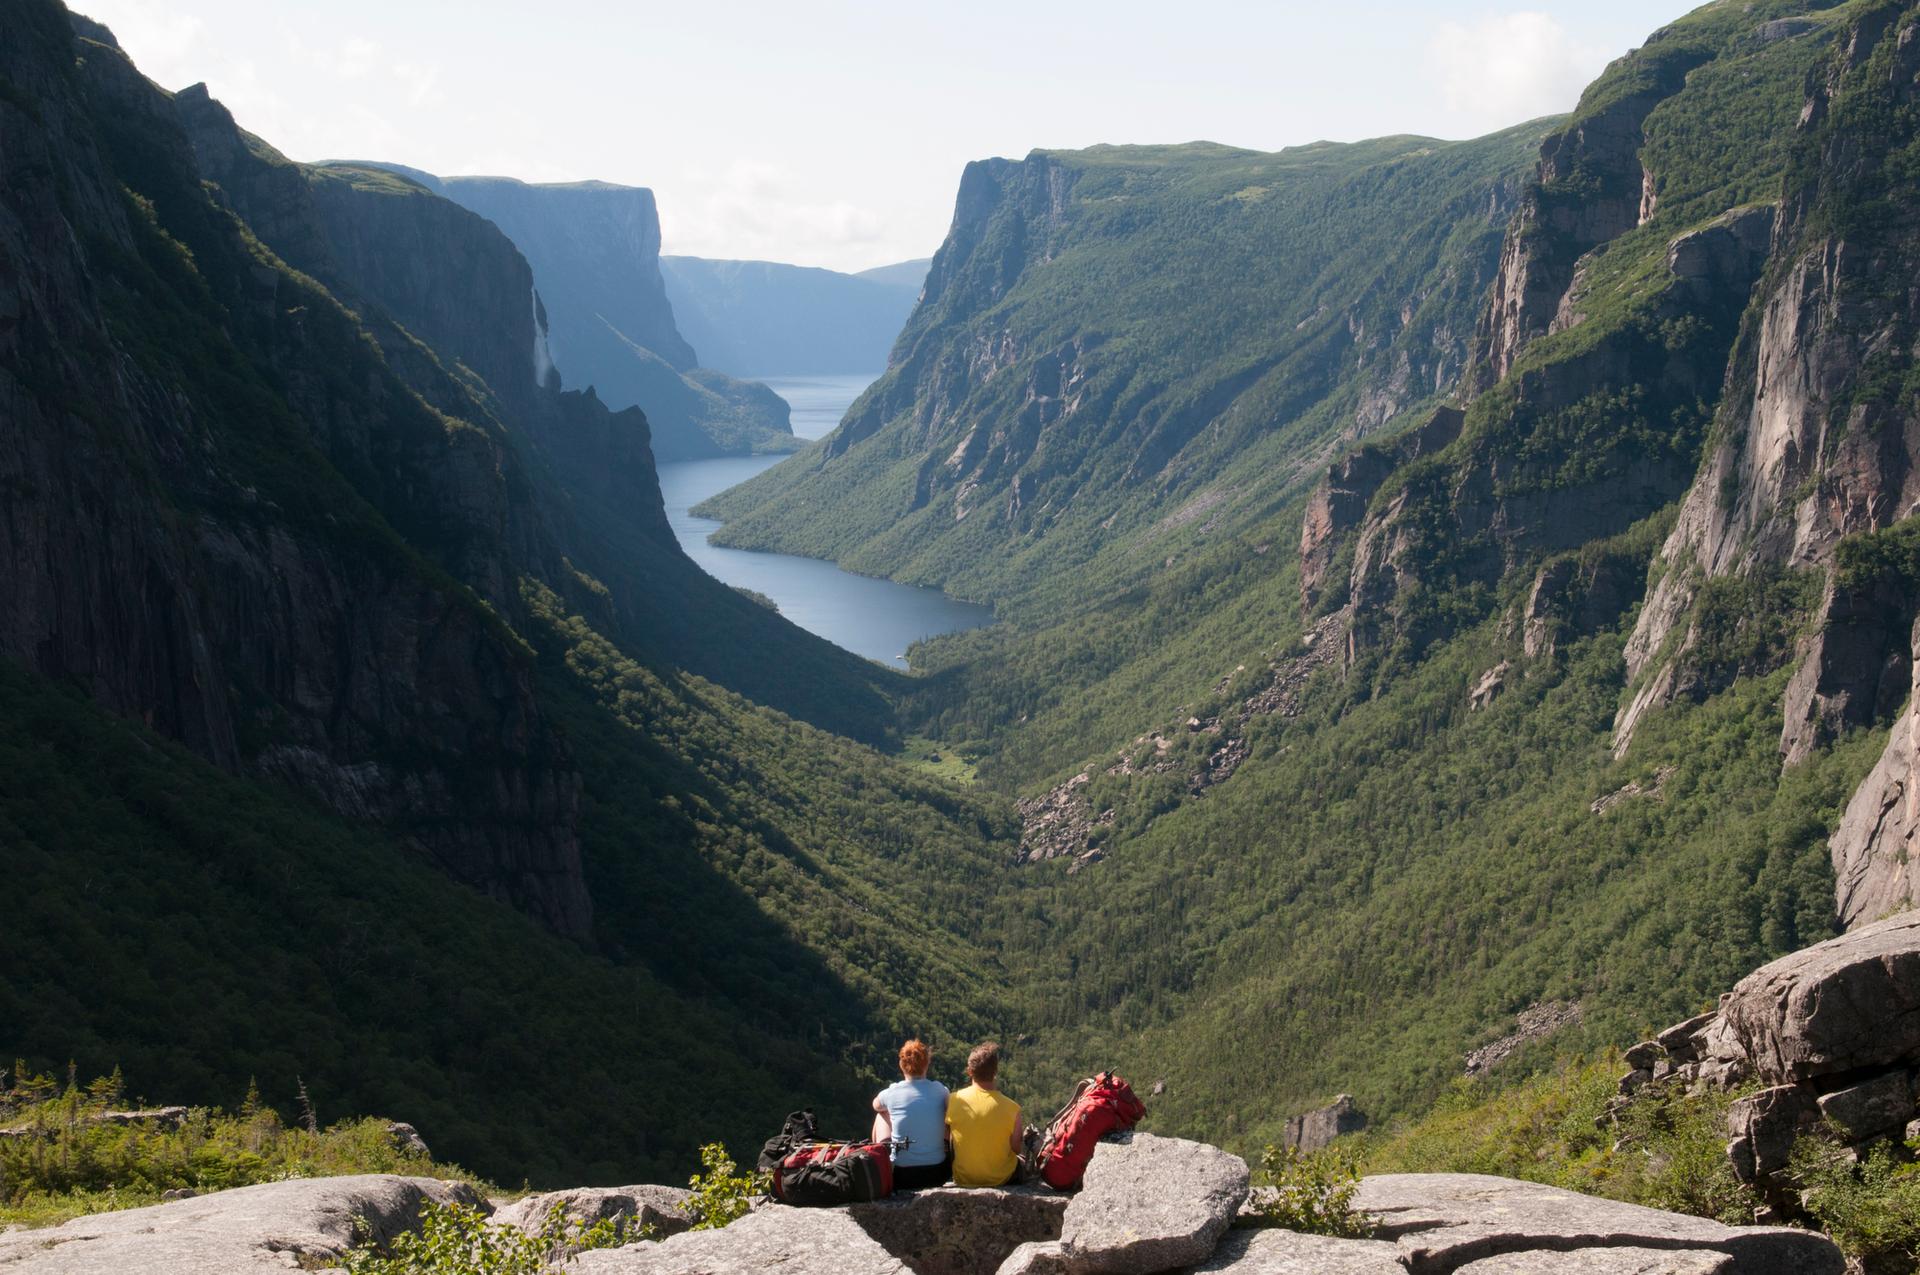 Hikers taking in the view at Gros Morne National Park, Western Brook Pond Fjord, Newfoundland and Labrador